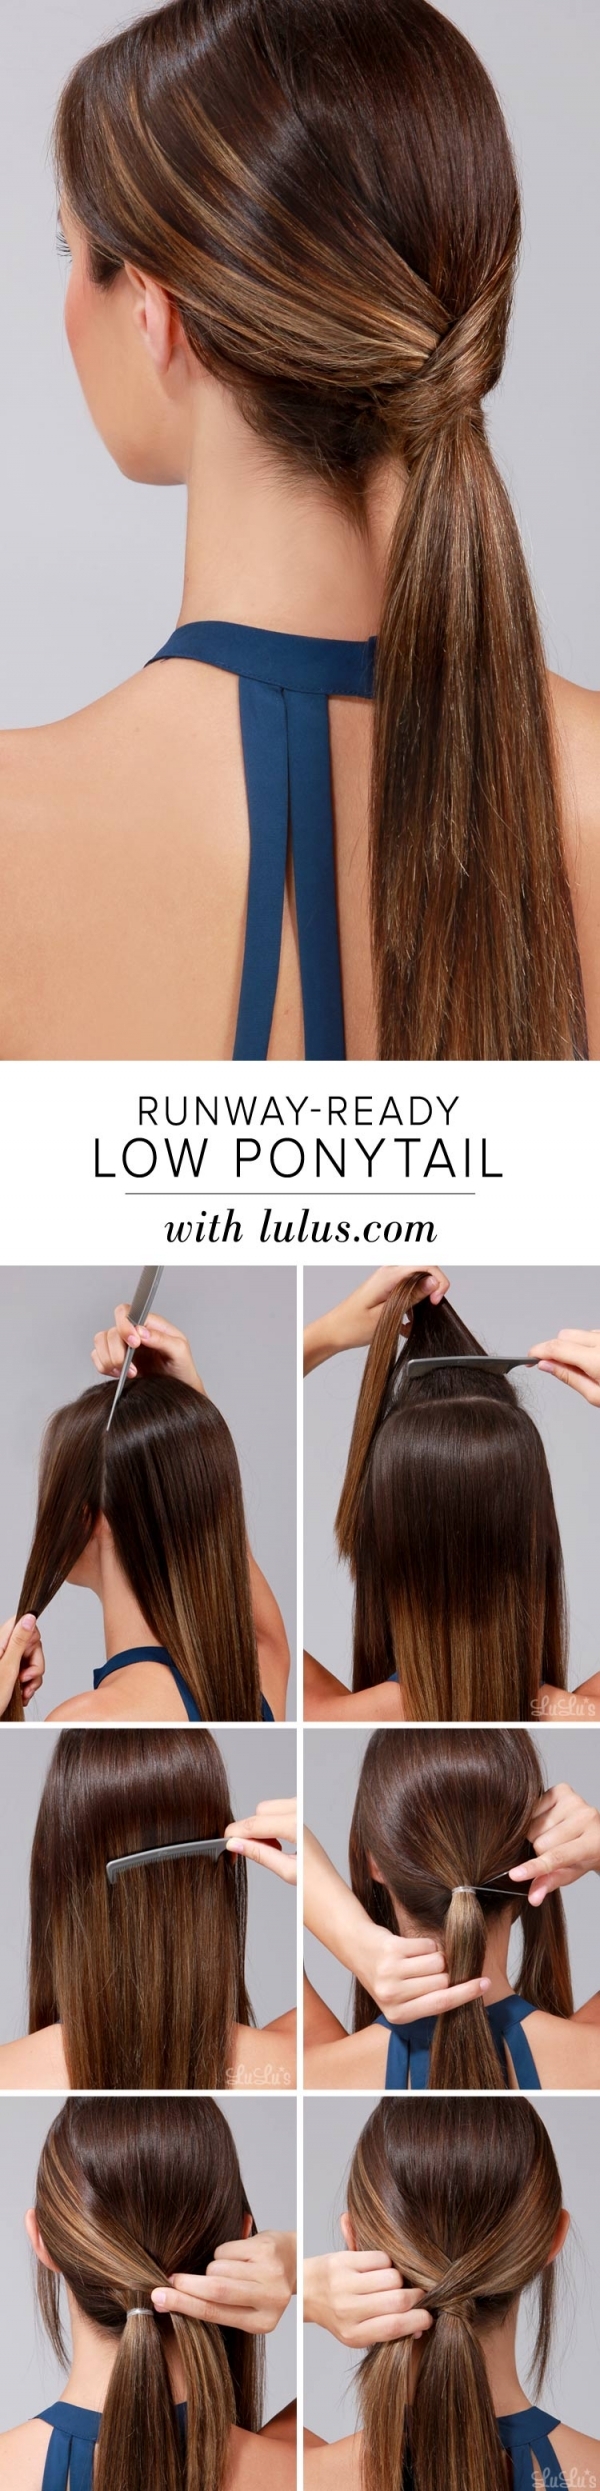 15 Simple Yet Stunning Hairstyle Tutorials for Lazy Women ...